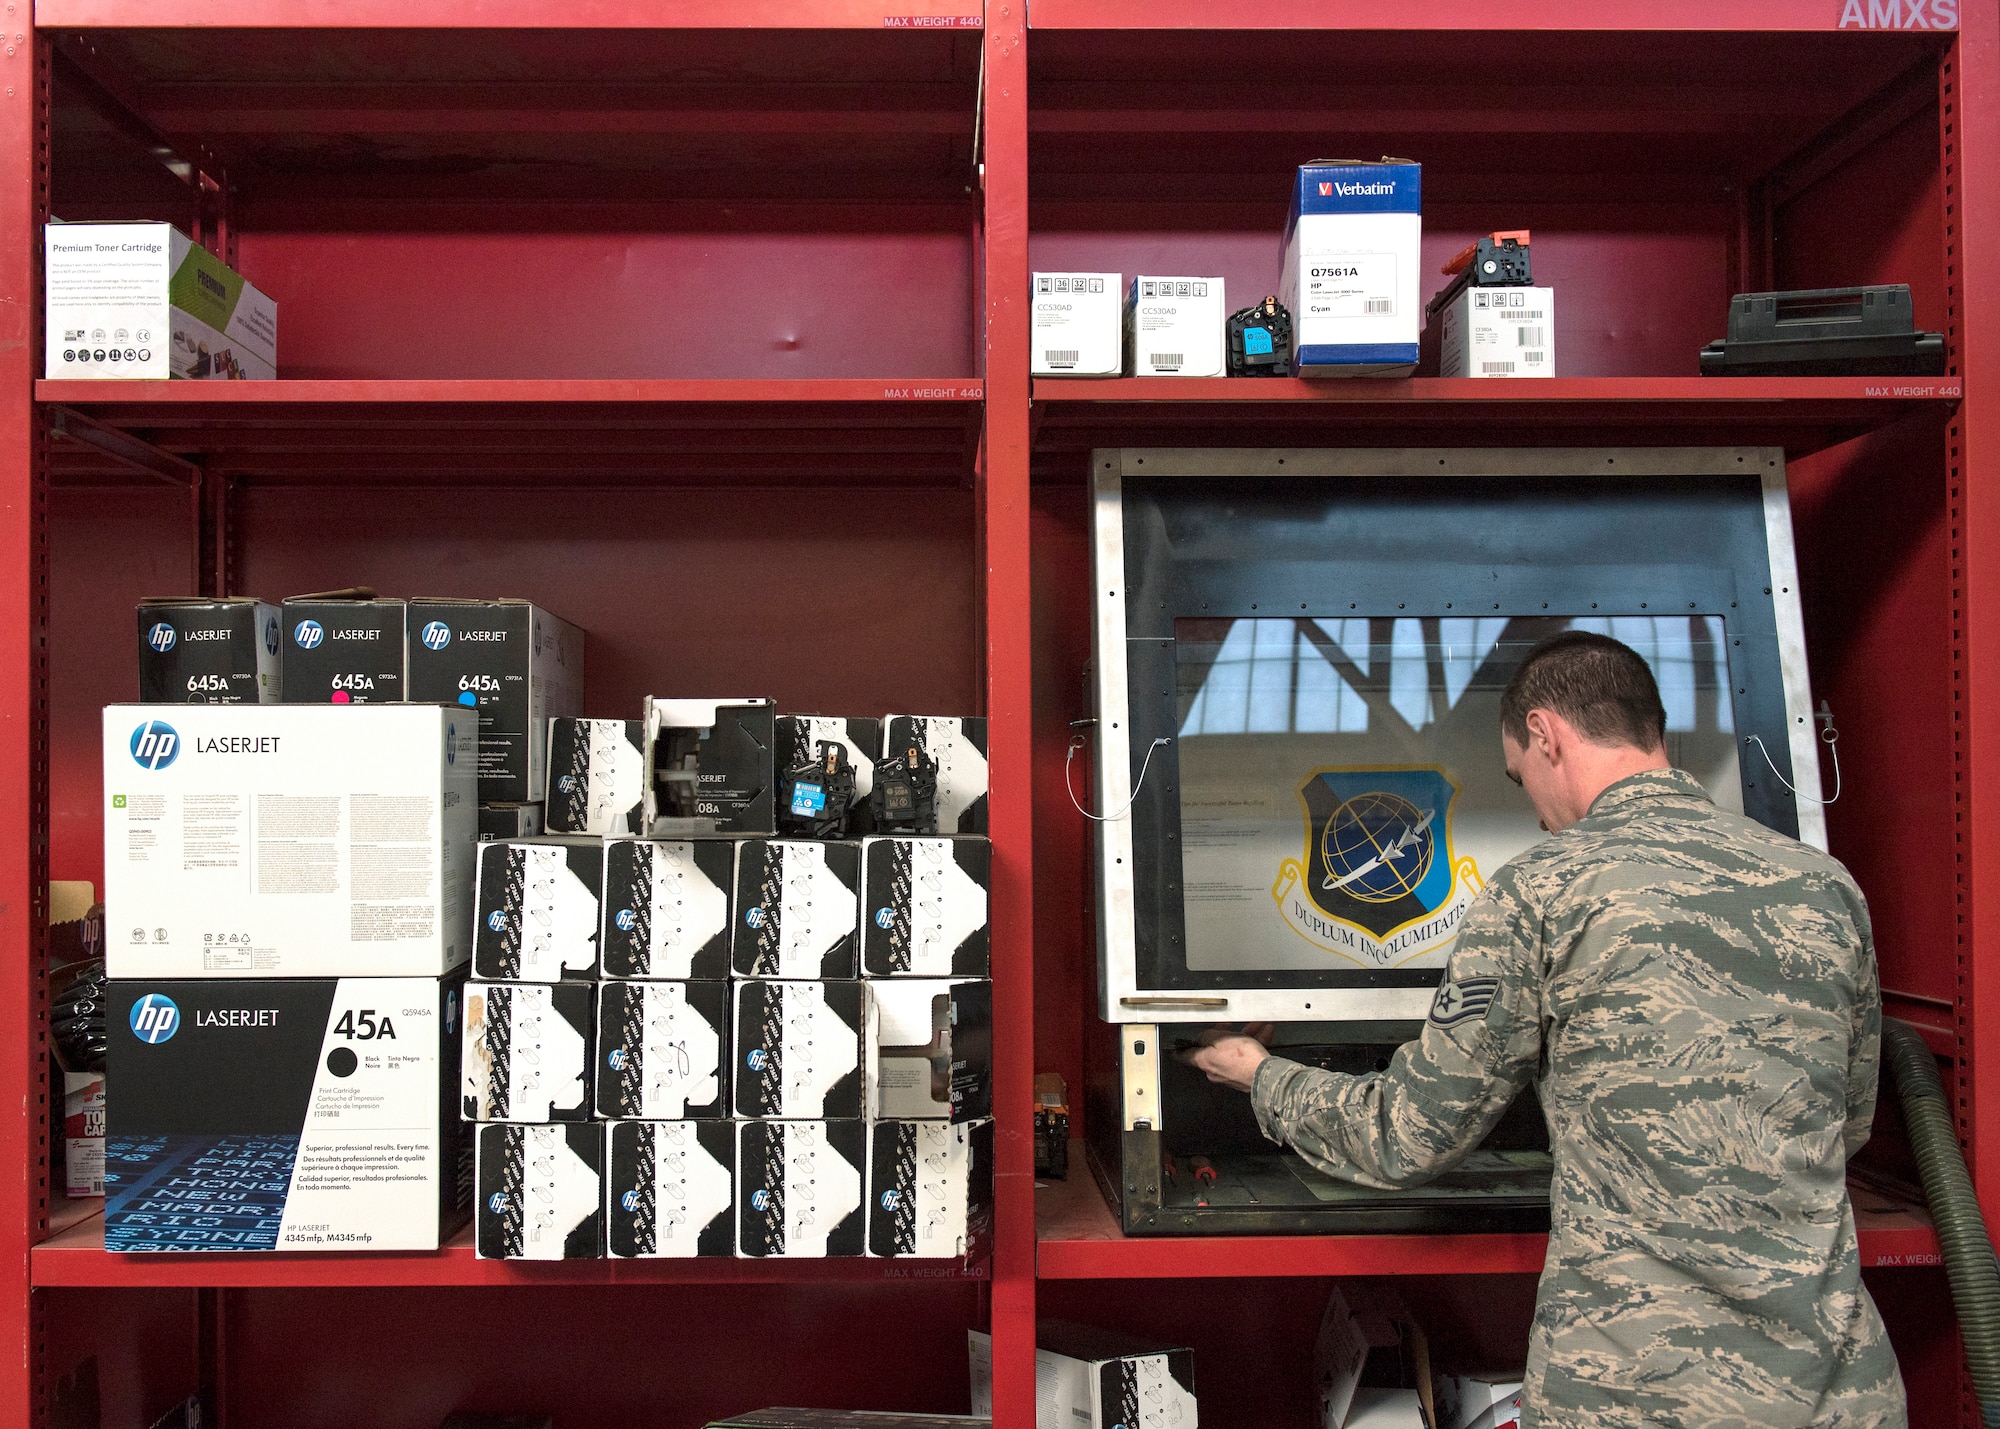 U.S. Air Force Staff Sgt. Tyler Ferris,  92nd Maintenance Group Air Force Repair Enhancement Program technician, prepares to refill an ink cartridge at Fairchild Air Force Base, Washington, March 20, 2019. The AFREP team has contributed toward the “Green in 19” initiative by implementing environmentally friendly practices through recharging ink cartridges to mitigate the many adverse effects of just throwing them away. (U.S. Air Force photo by Airman 1st Class Whitney Laine)